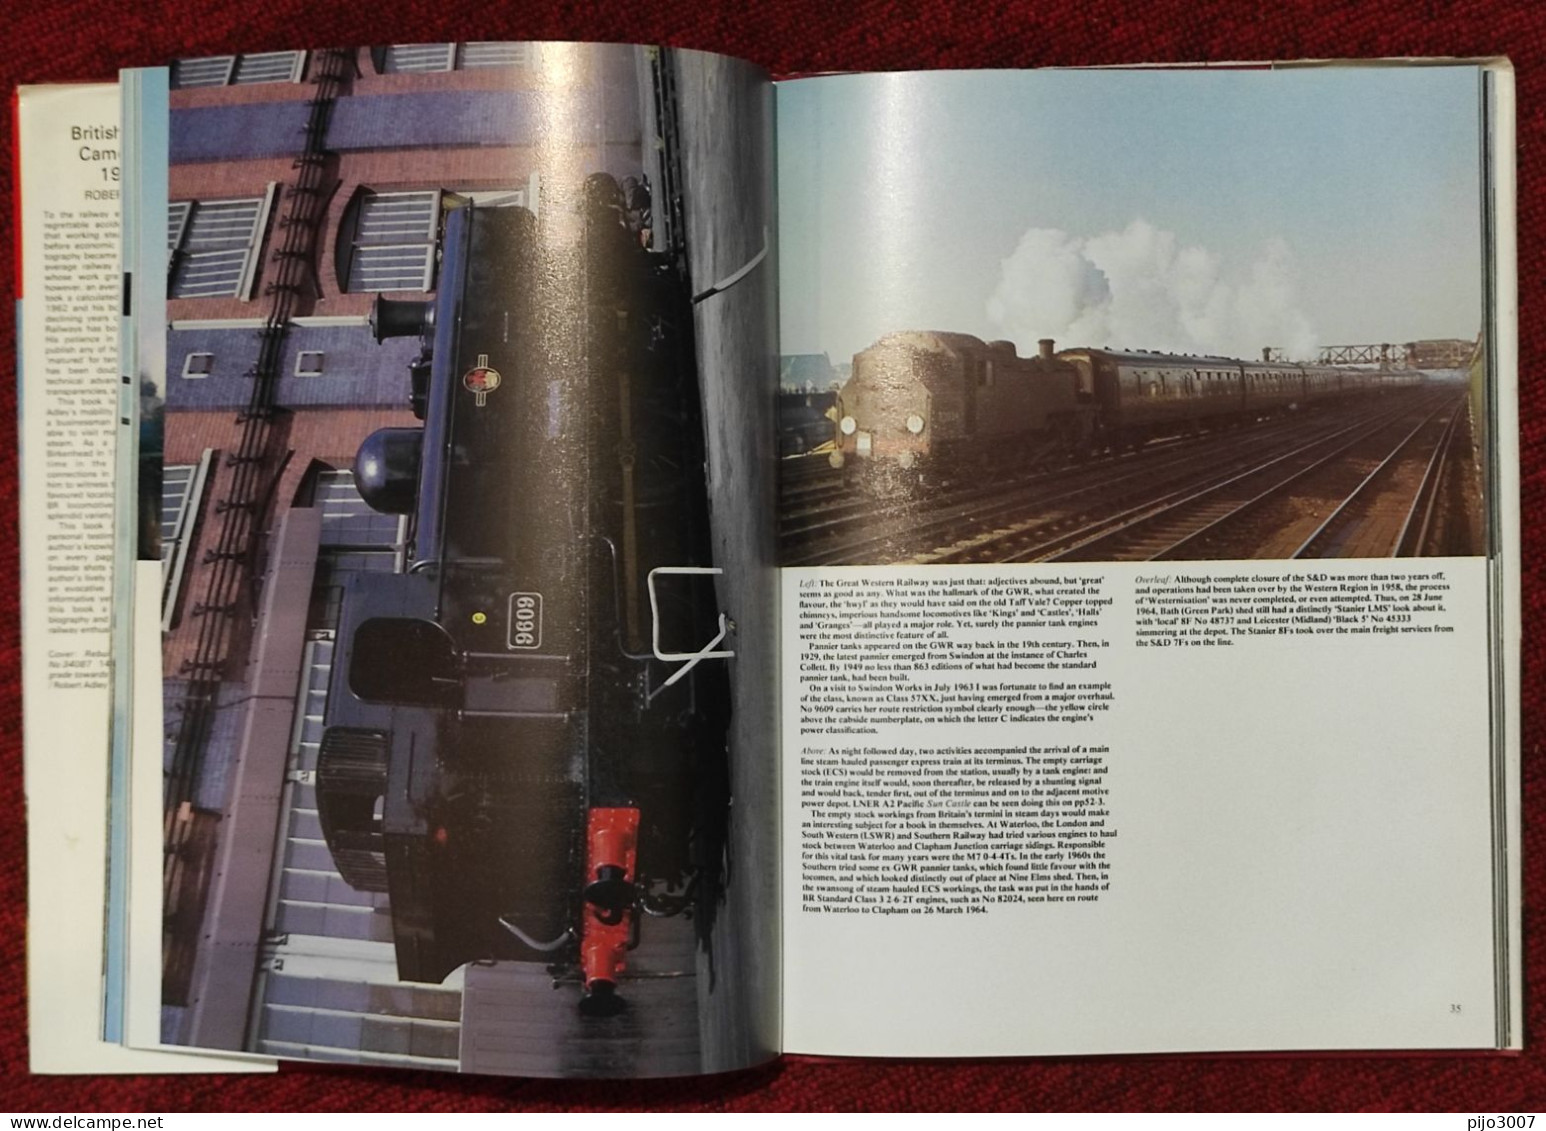 Livre Relié "British Steam In Cameracolour 1962-68 " – 1979 By Robert Adley (Author) - Railway & Tramway